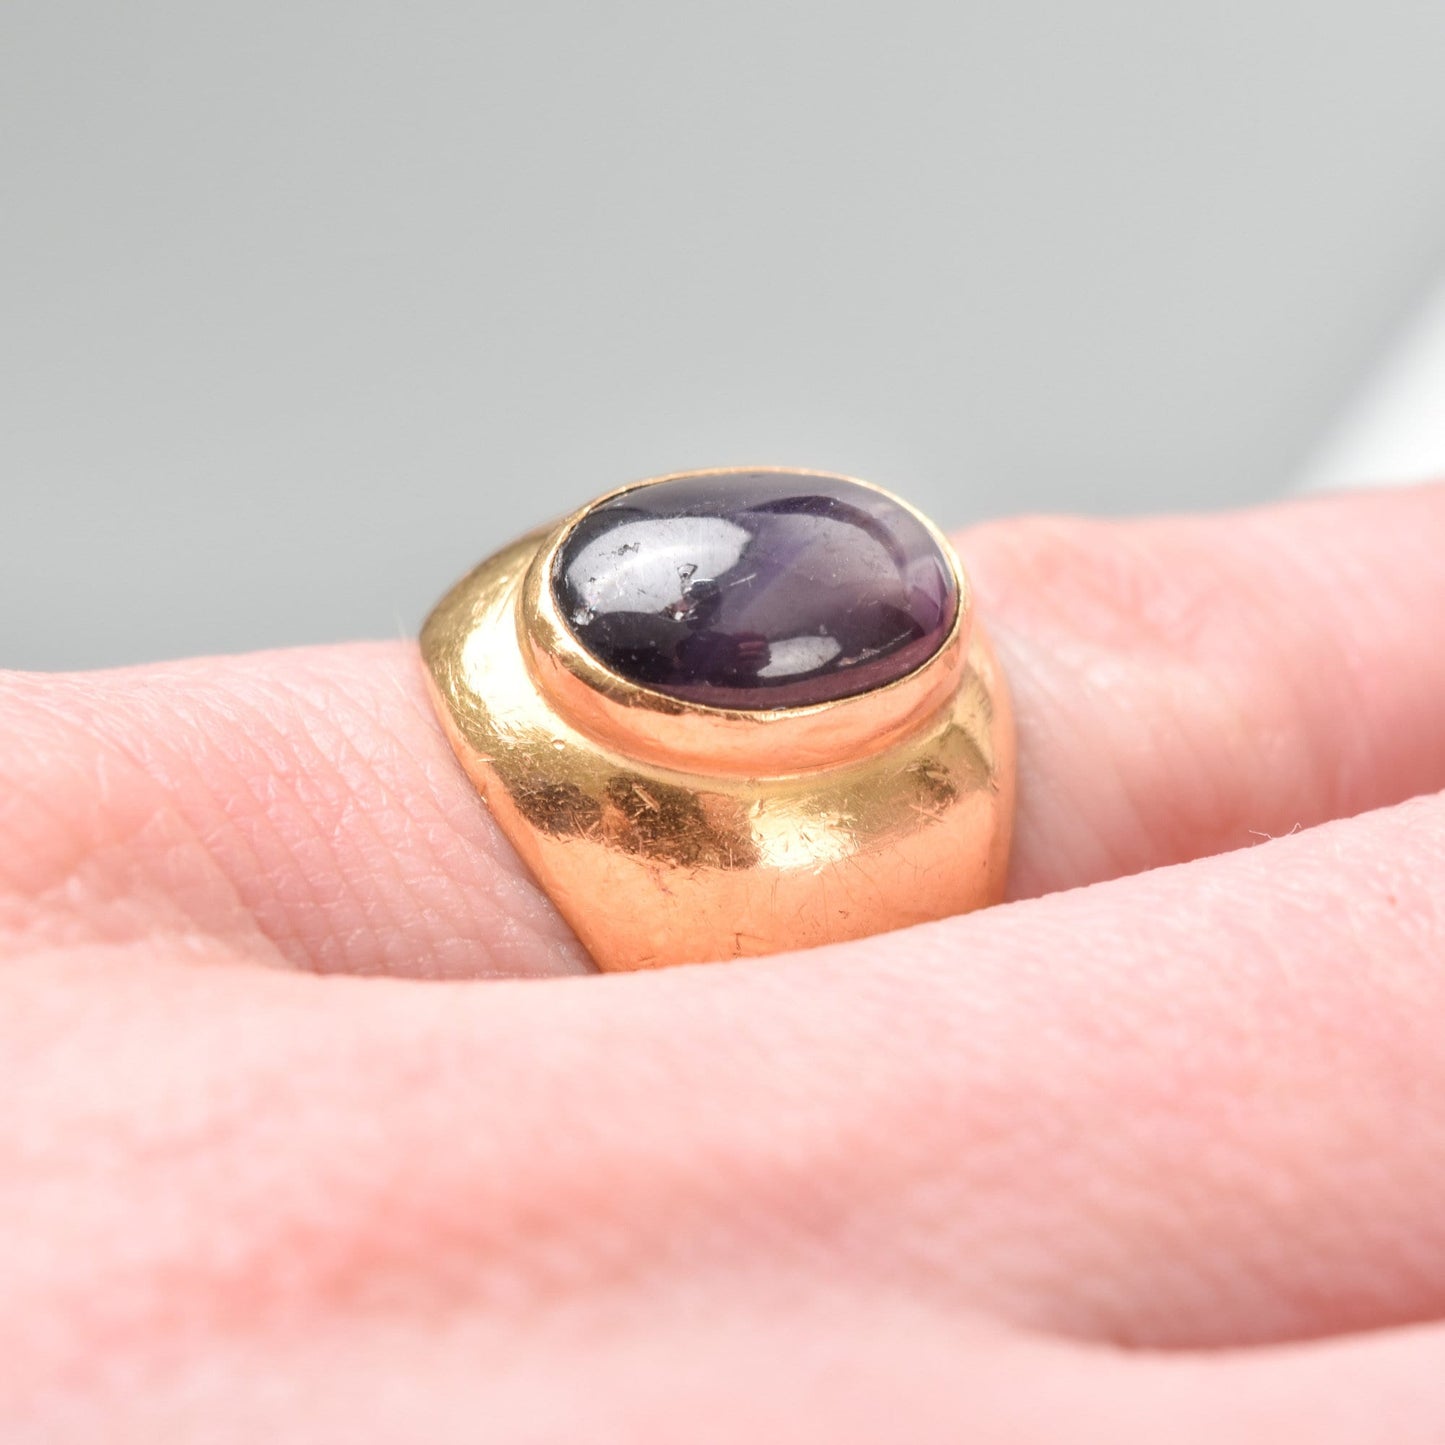 Black Star Sapphire Ring In 18K Yellow Gold, Solid Gold Cab Ring, Estate Jewelry, Size 5 3/4 US